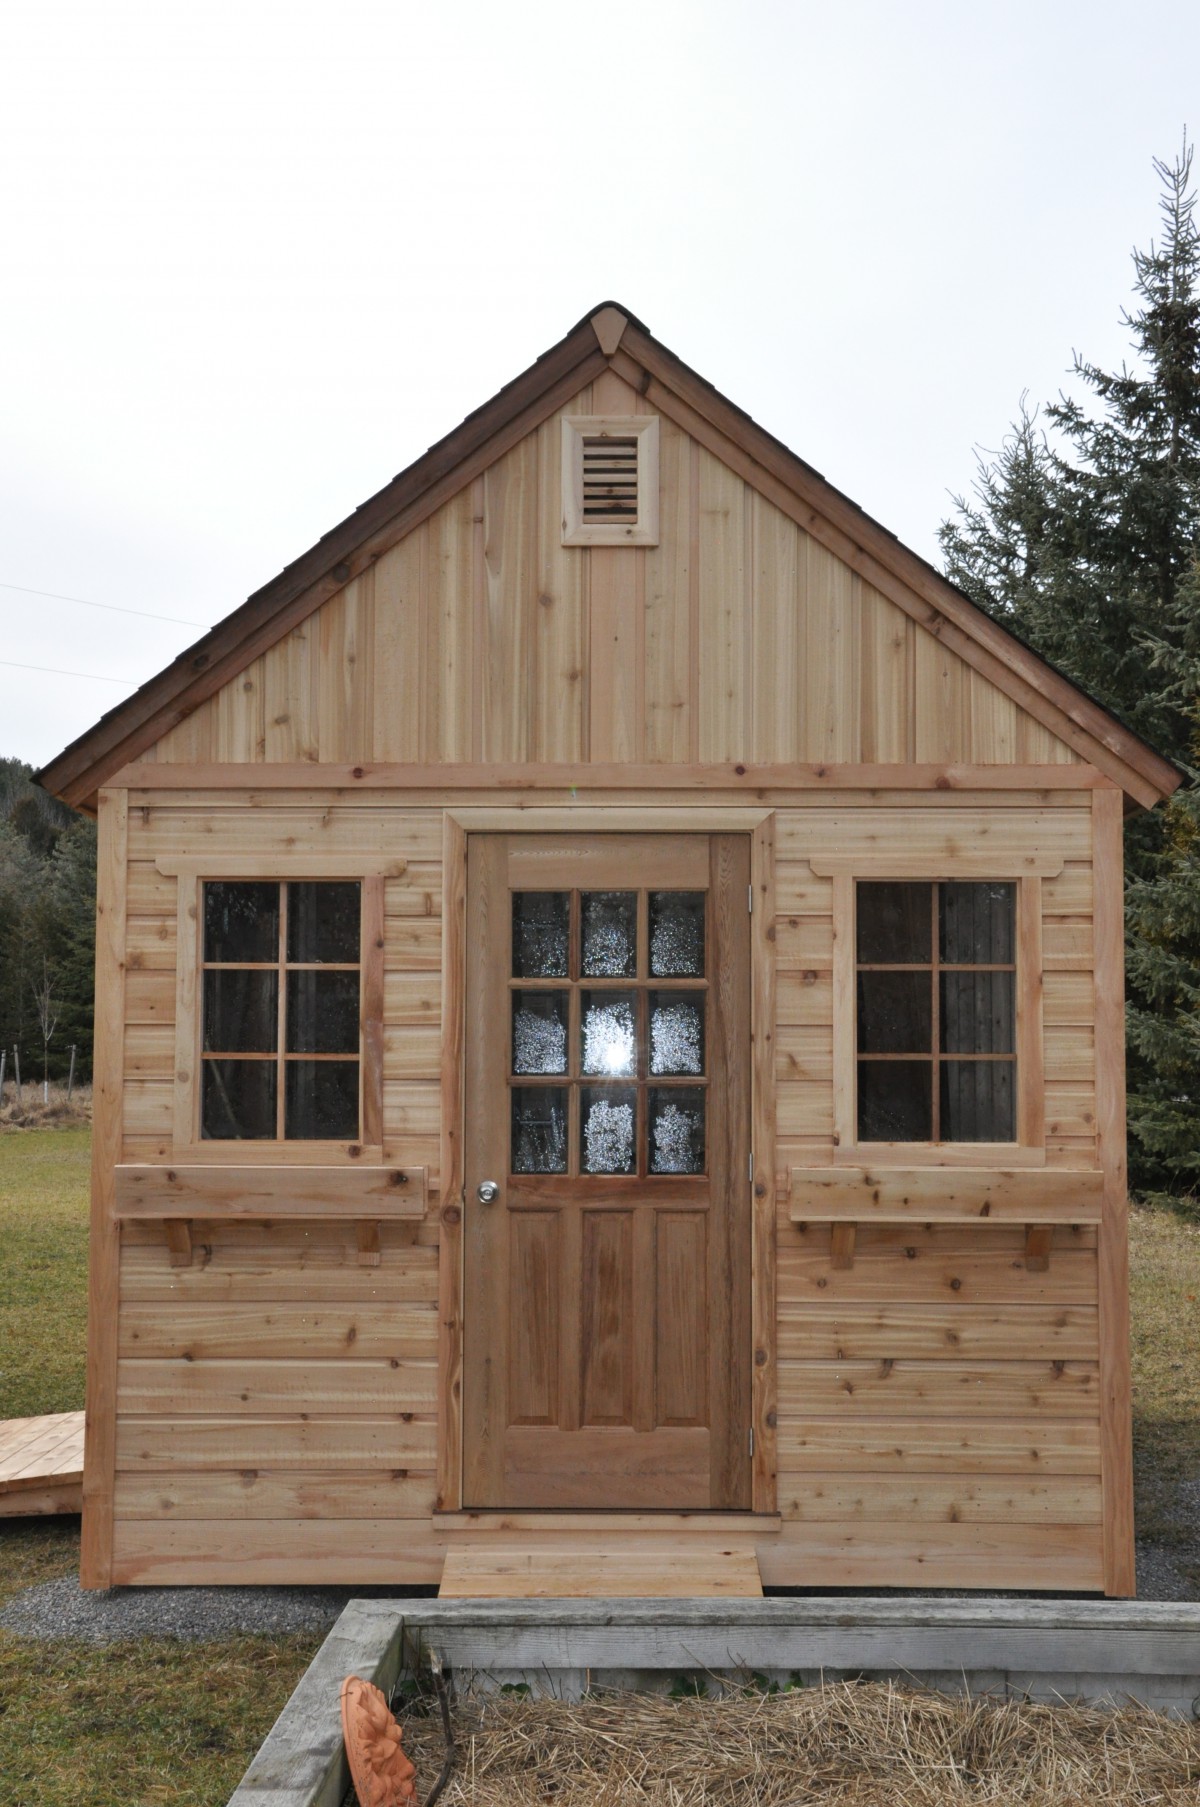 Telluride storage shed plan 10x12 with double doors seen from the front. ID number 5602-3